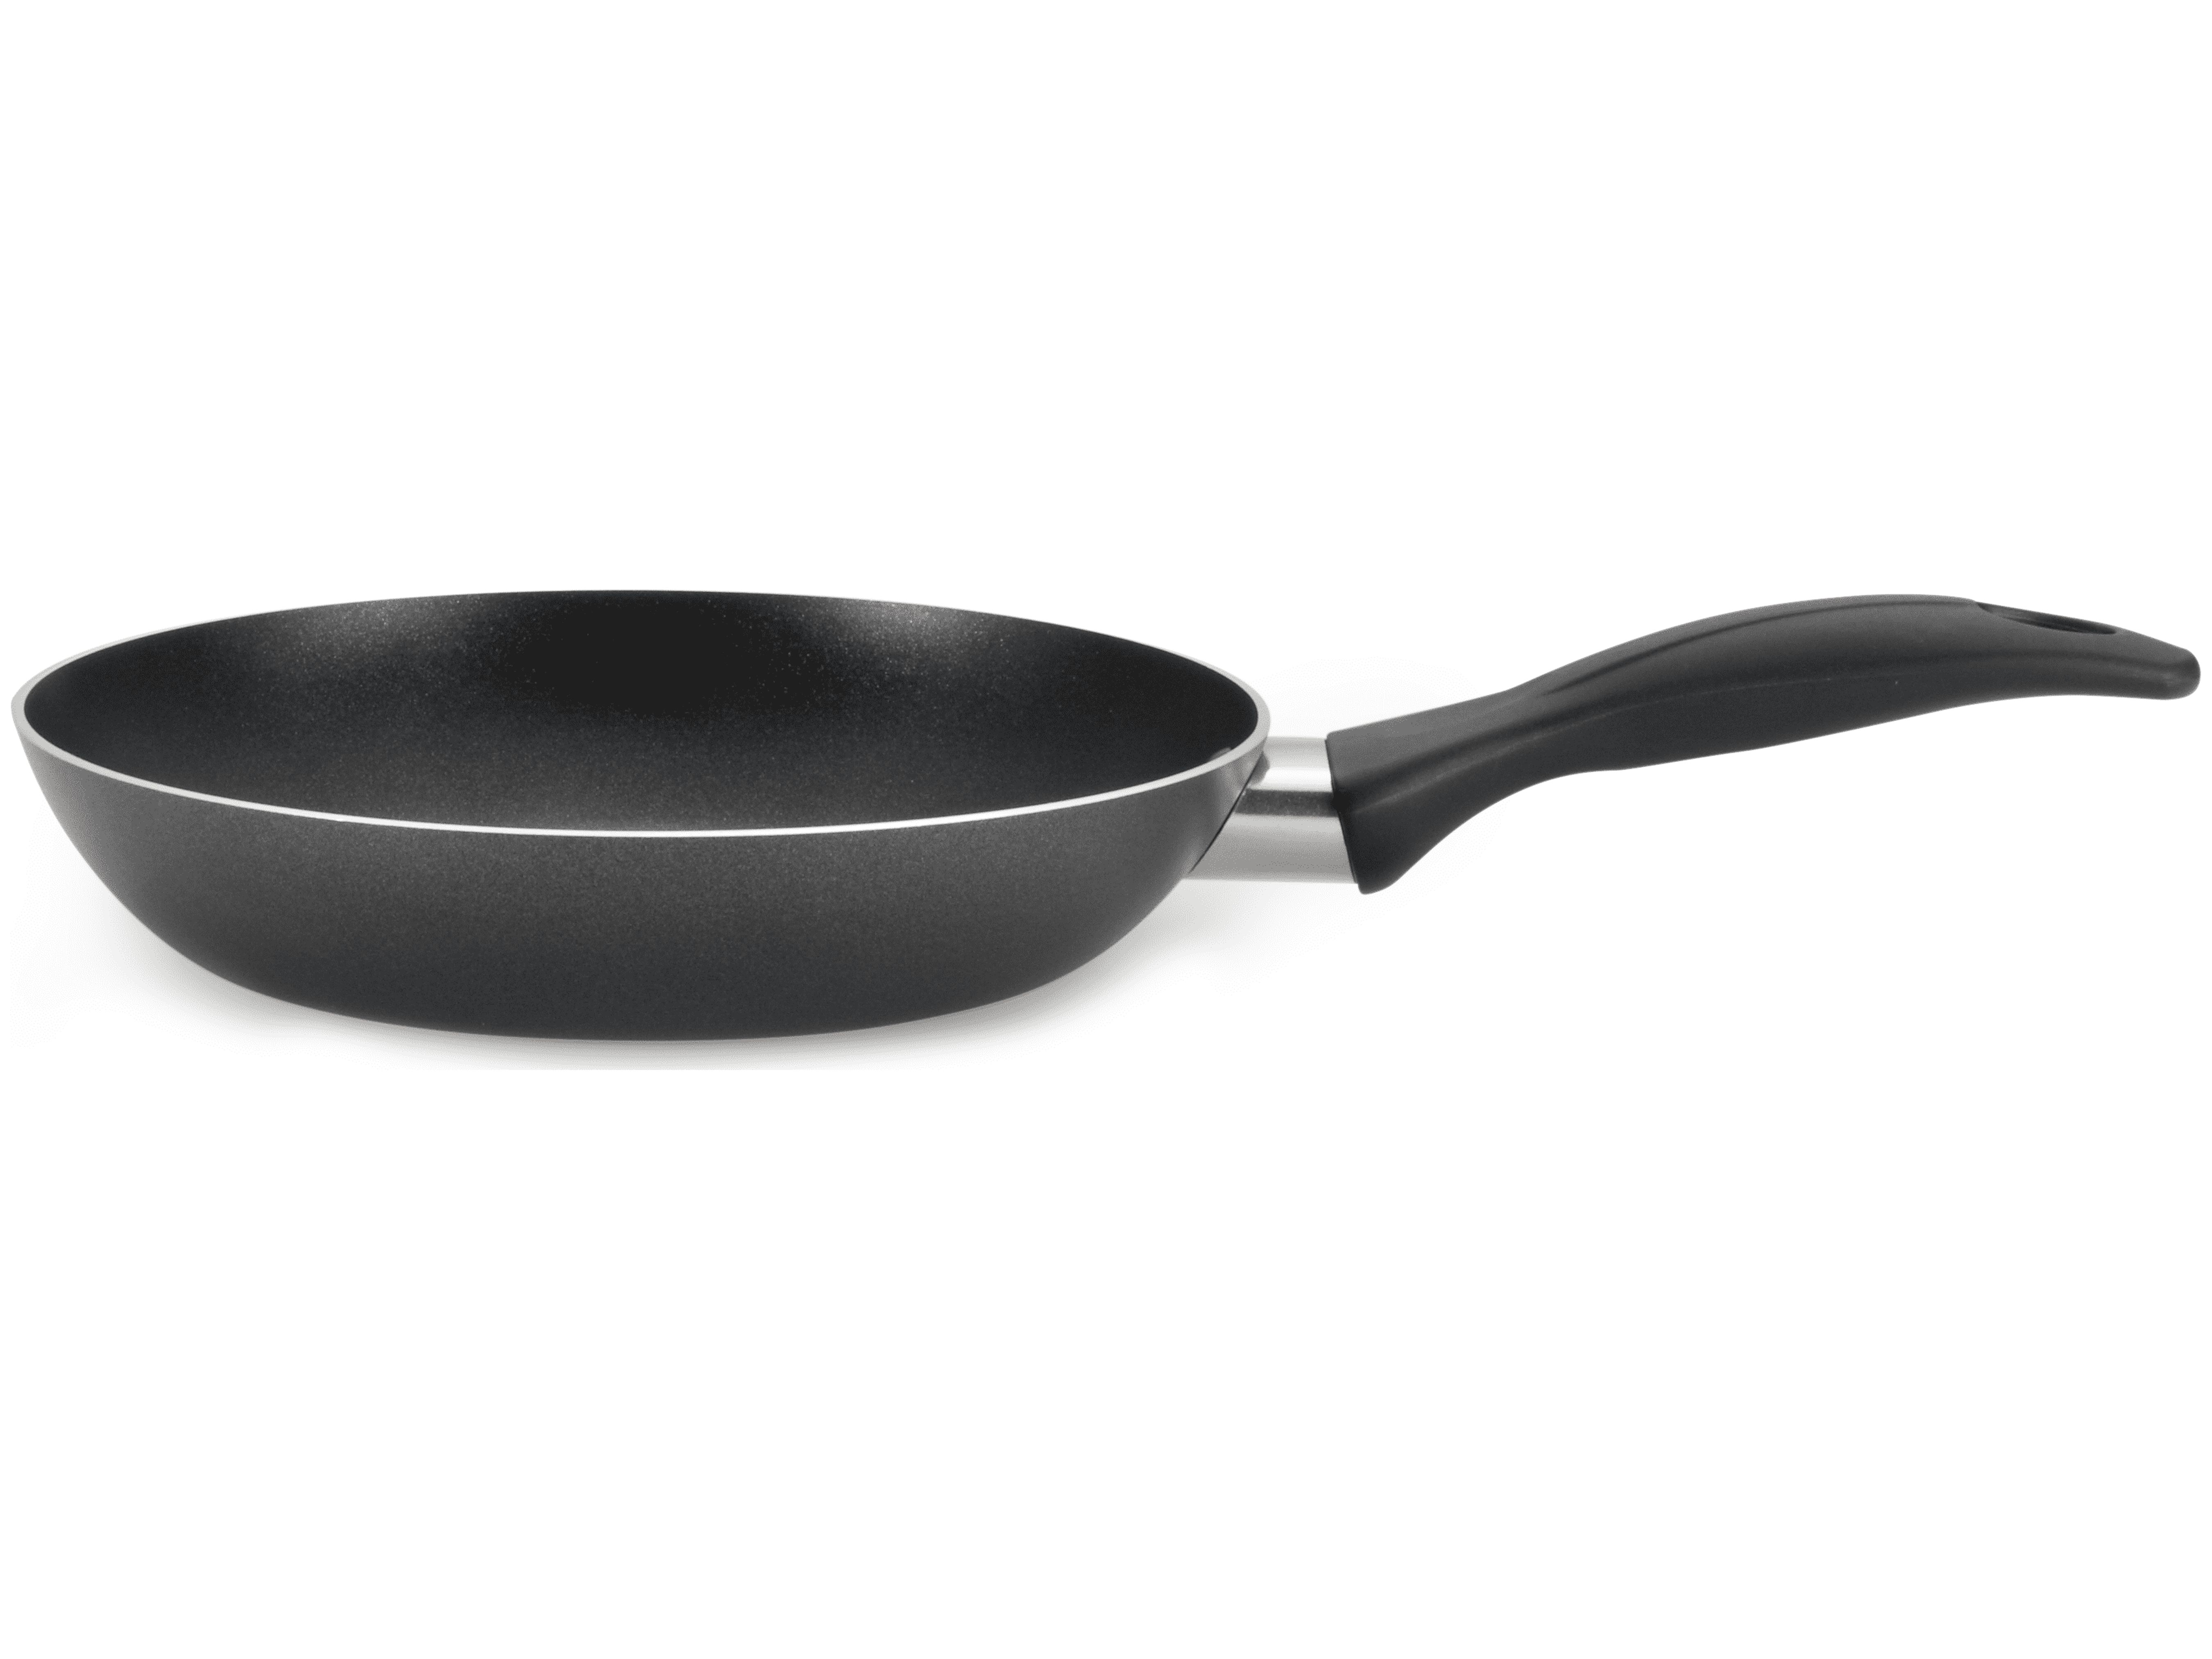 T-fal Easy Care 8" Nonstick Frypan, Black - image 3 of 7